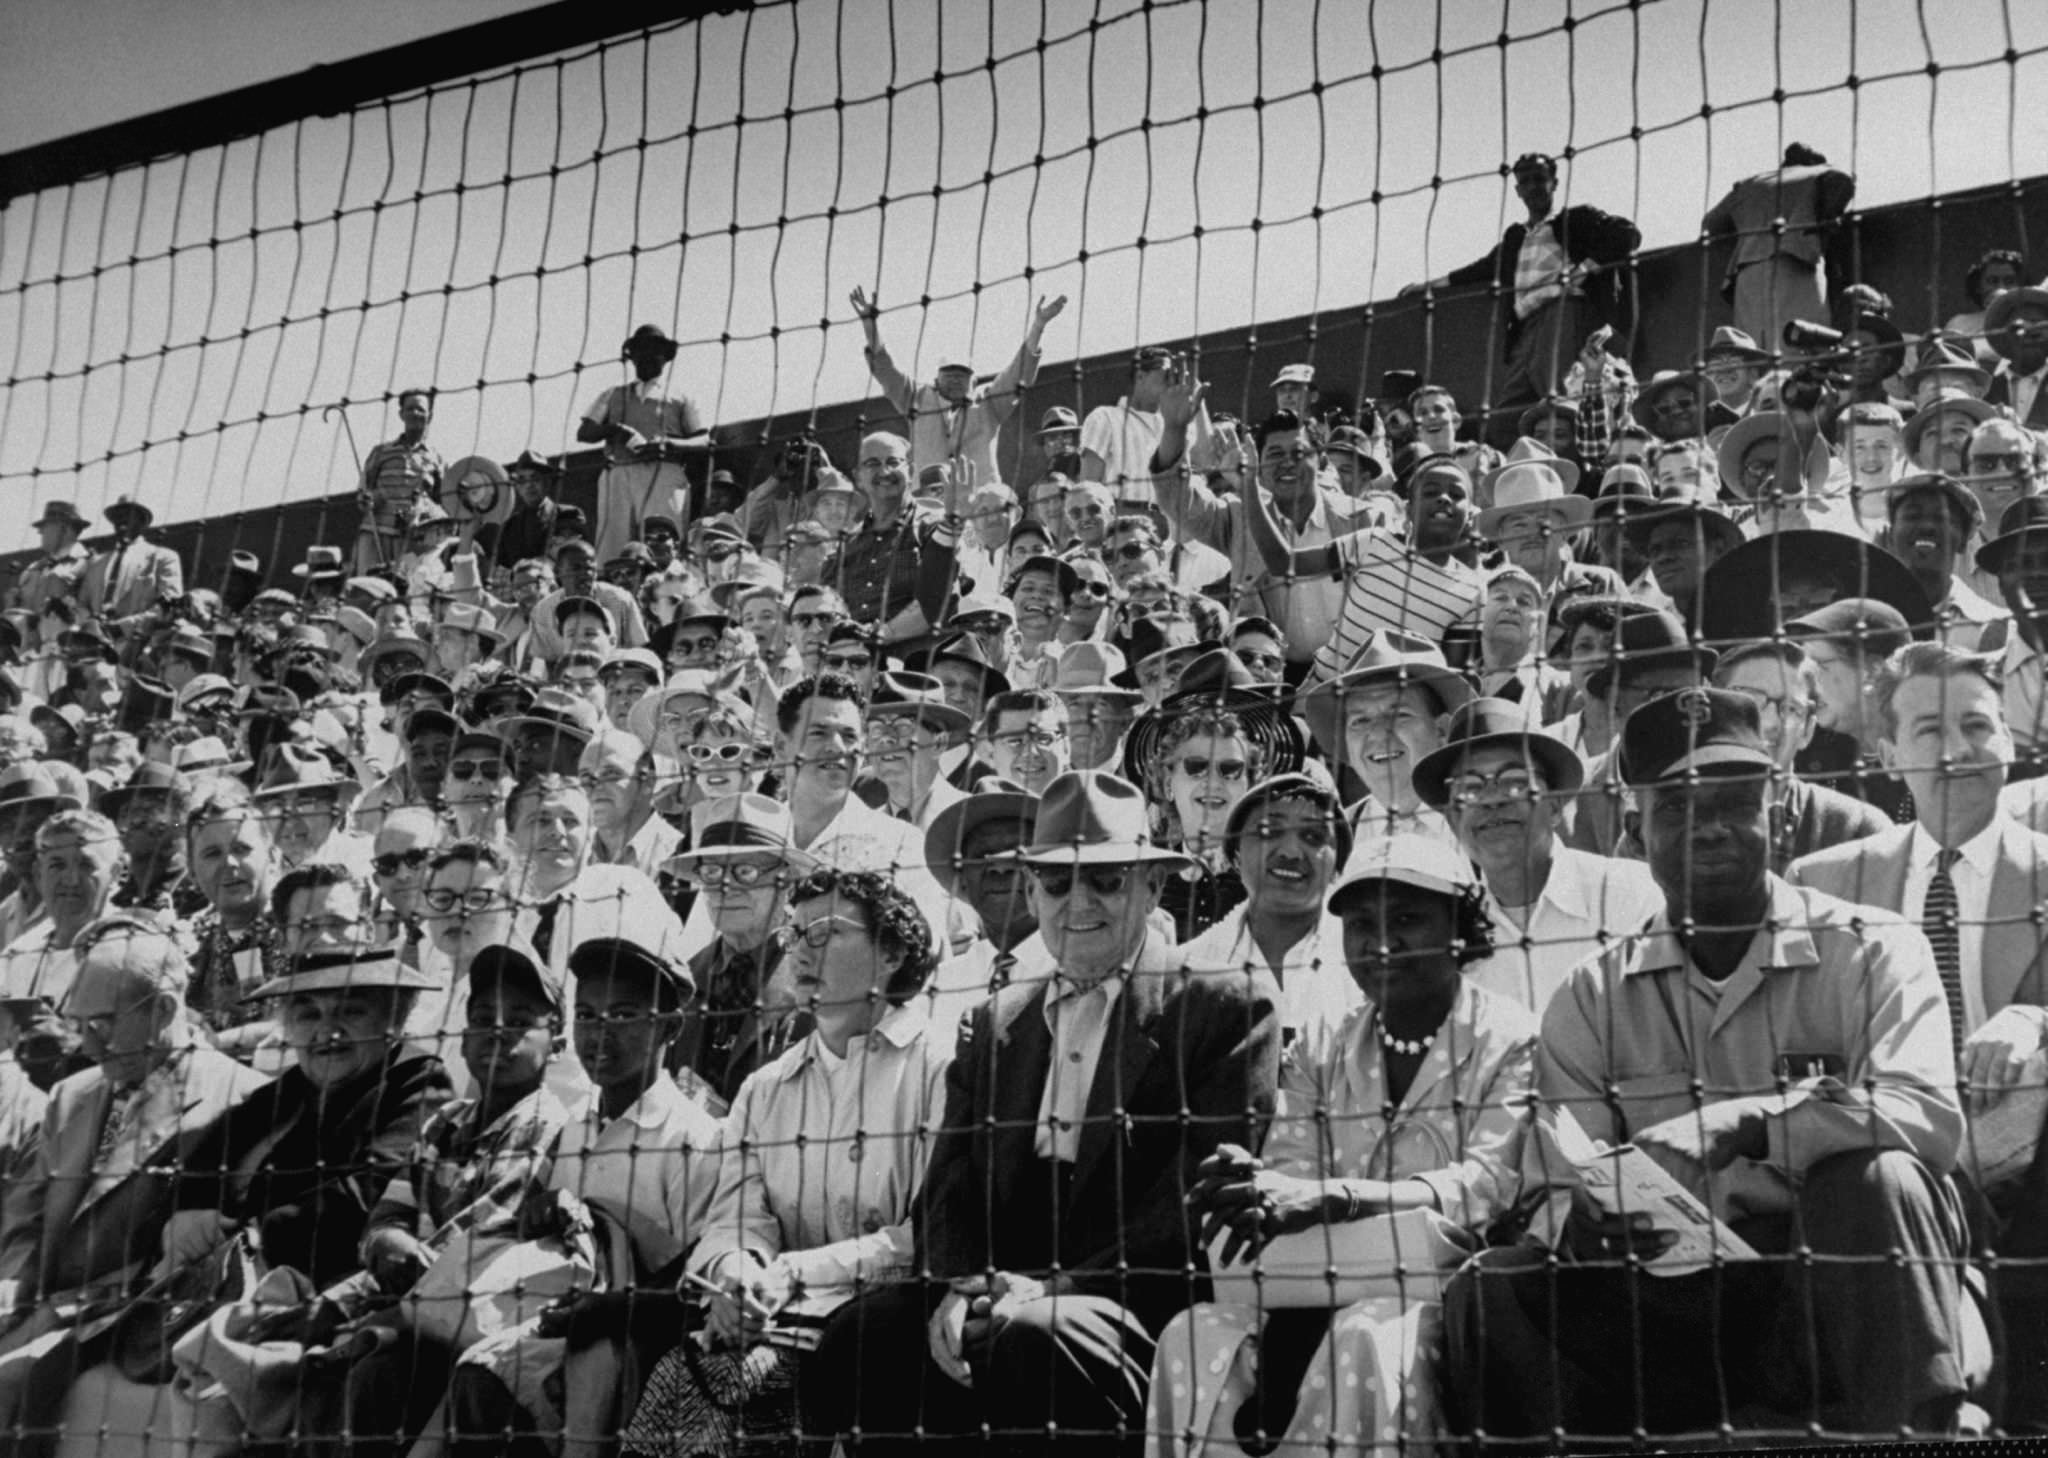 Baseball fans during the opening game between the San Francisco Giants and Los Angeles Dodgers in 1958